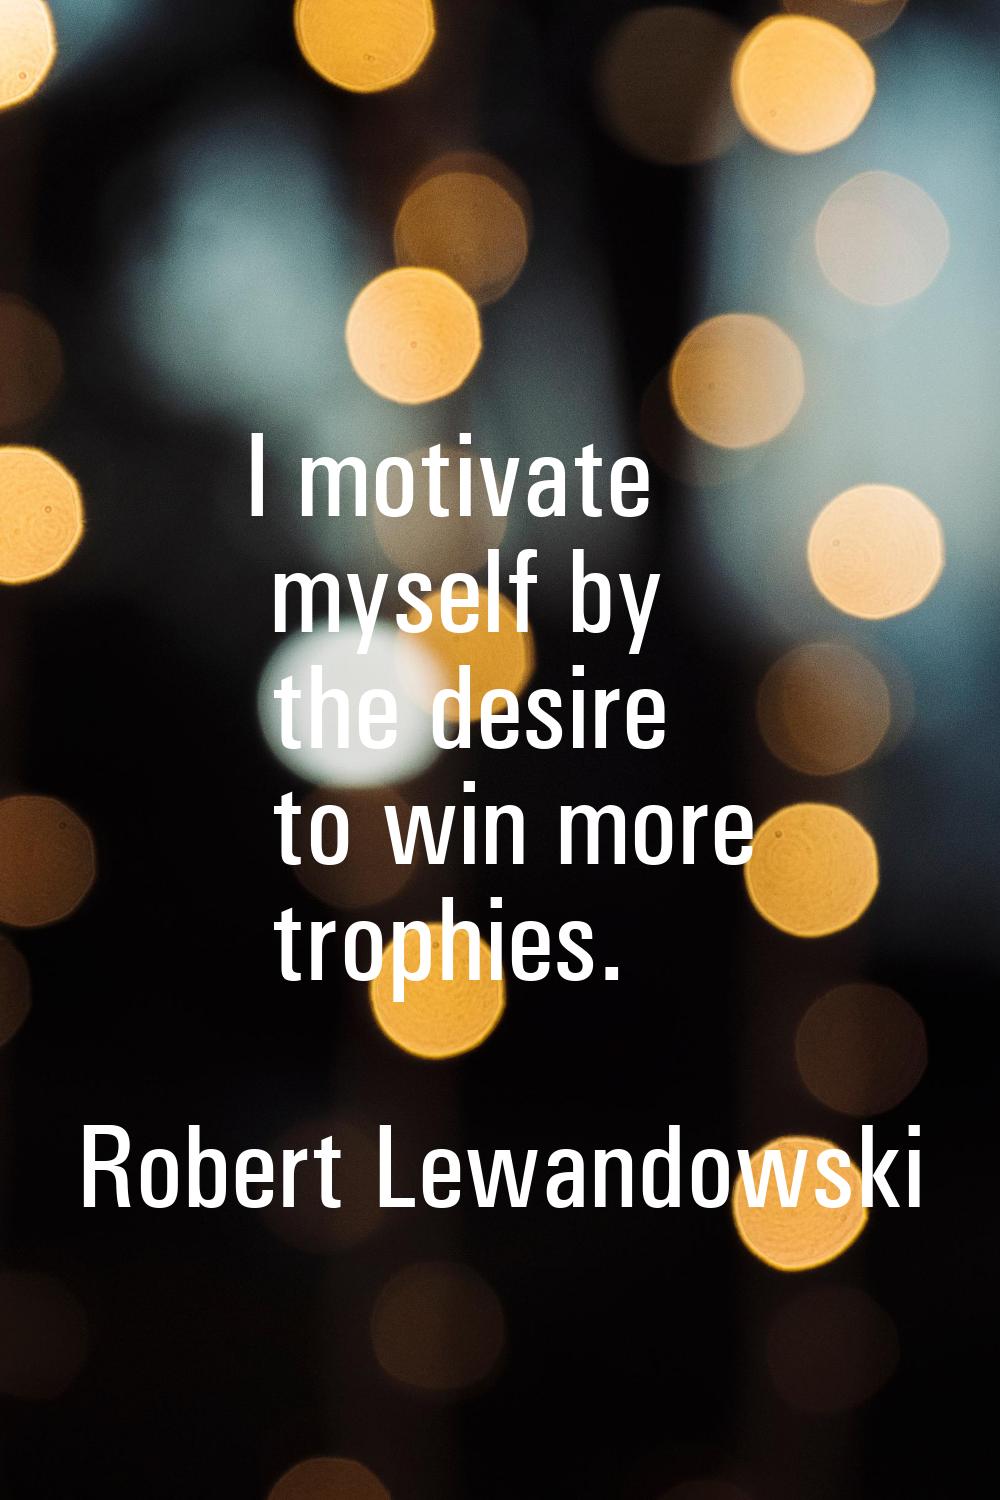 I motivate myself by the desire to win more trophies.